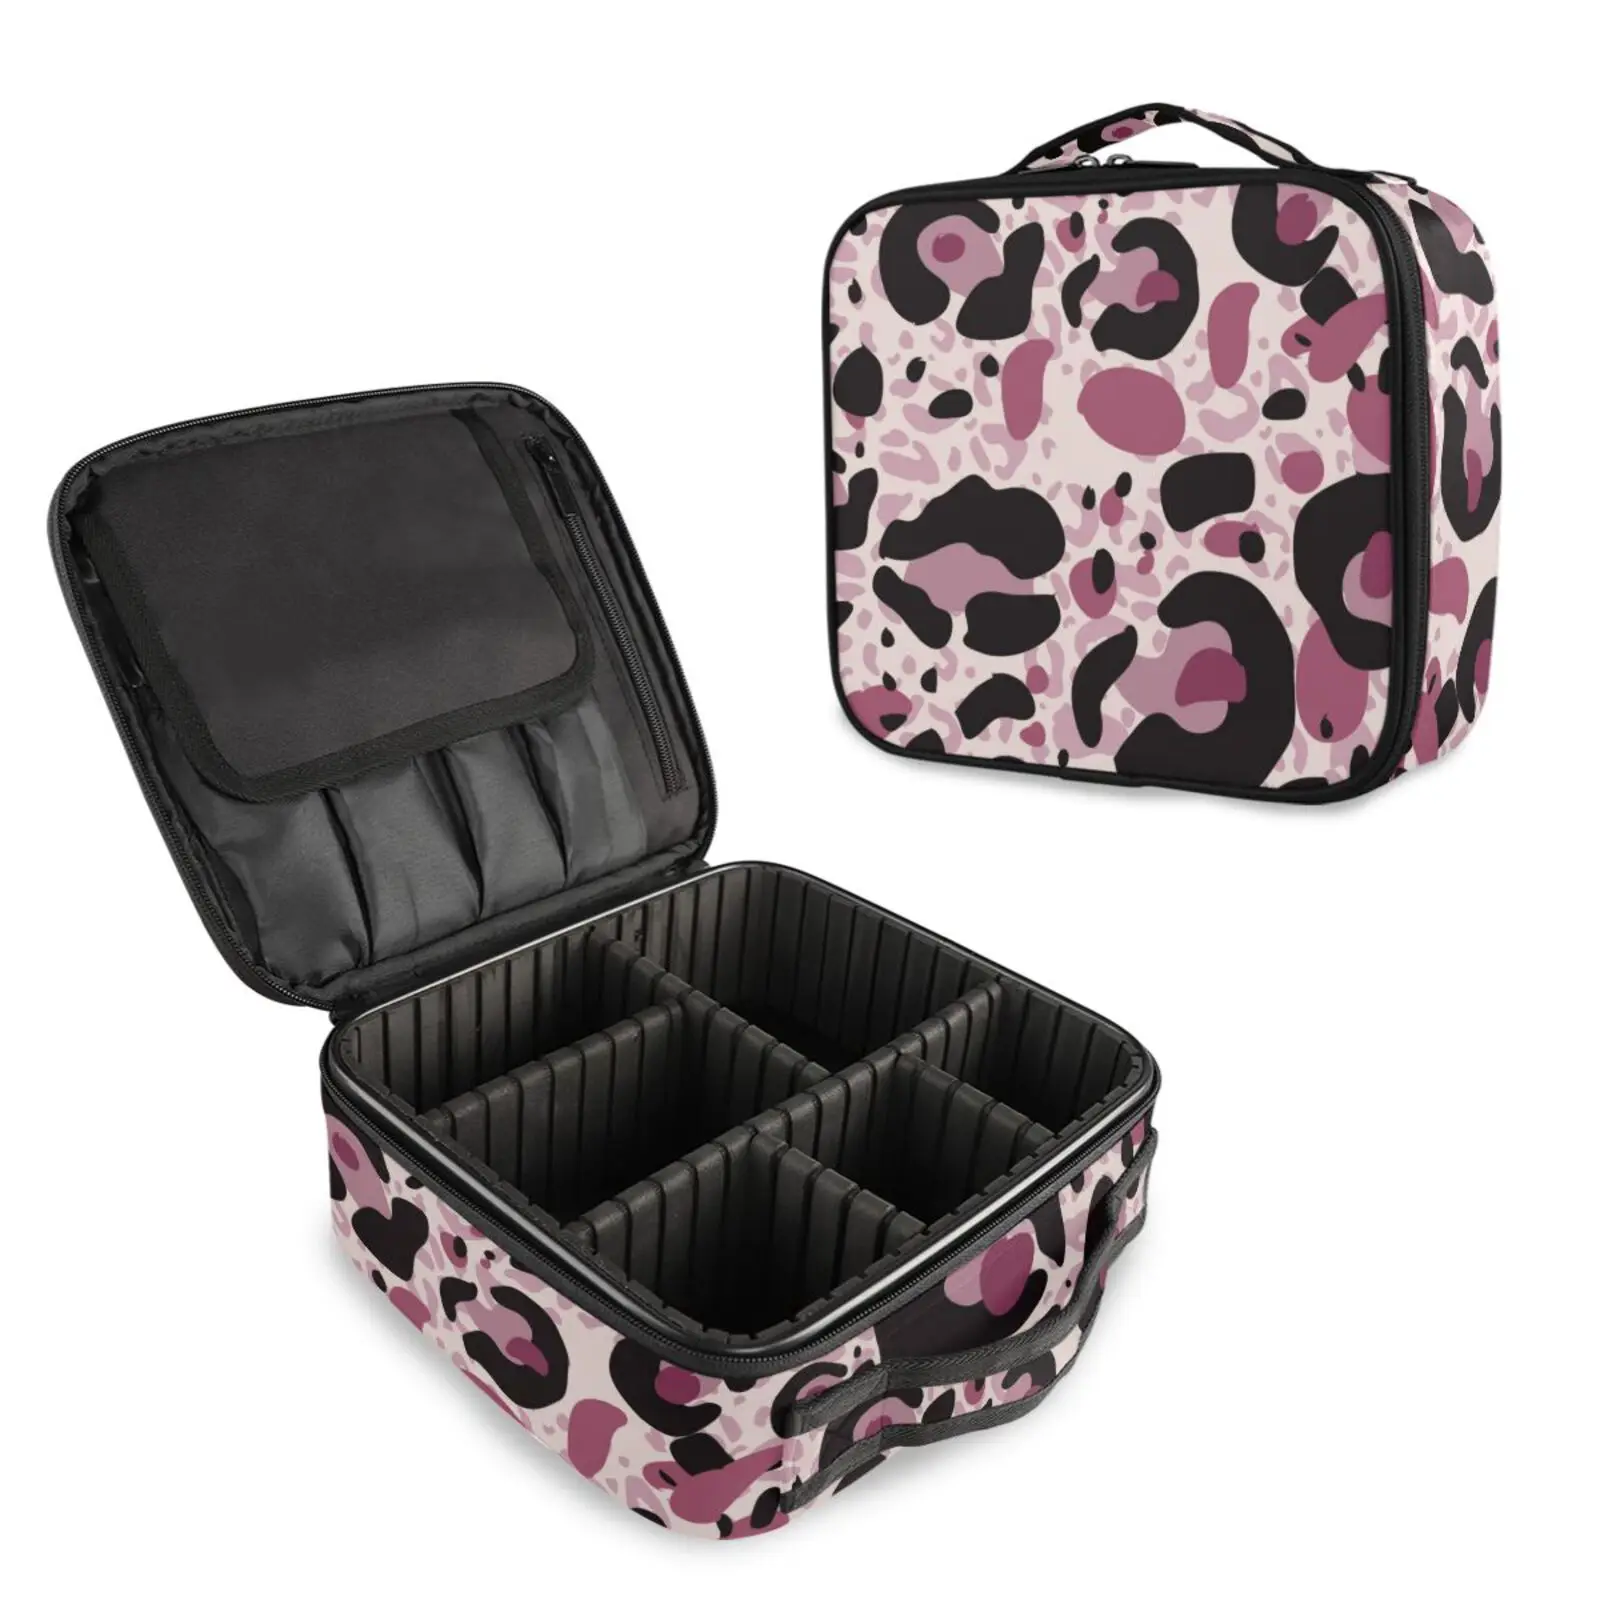 Toiletry Bag Cosmetic Bag Professional Organizer Women Travel Make Up Cases Big Capacity Cosmetic Leopard Print Suitcases Makeup